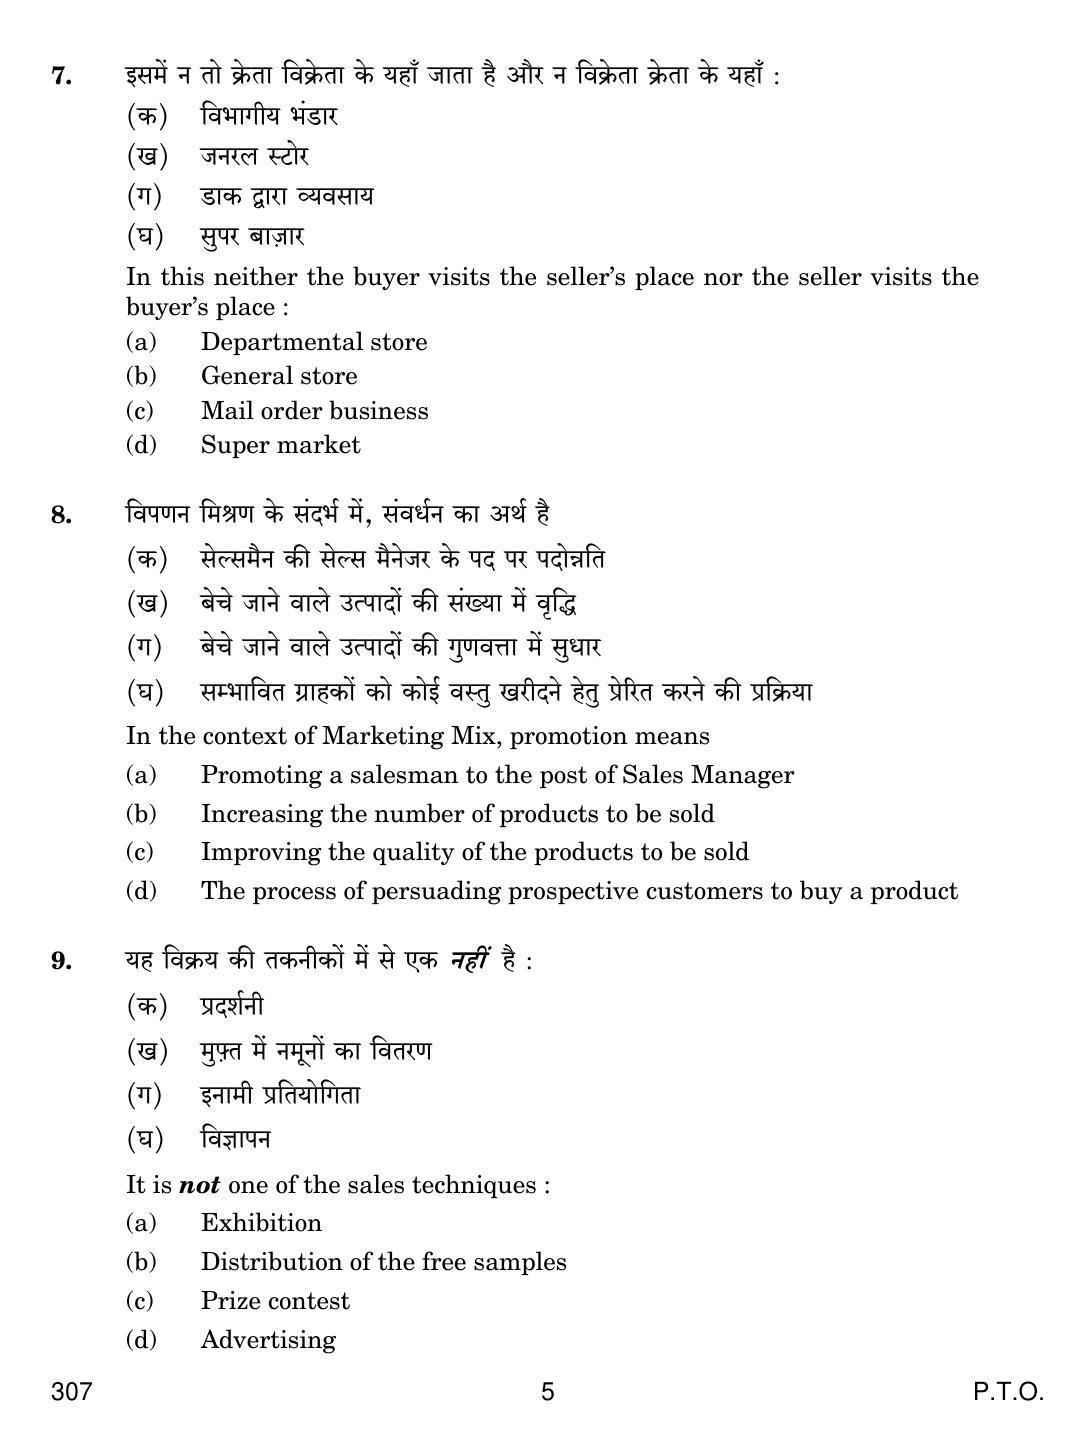 CBSE Class 12 307 Marketing 2019 Question Paper - Page 5